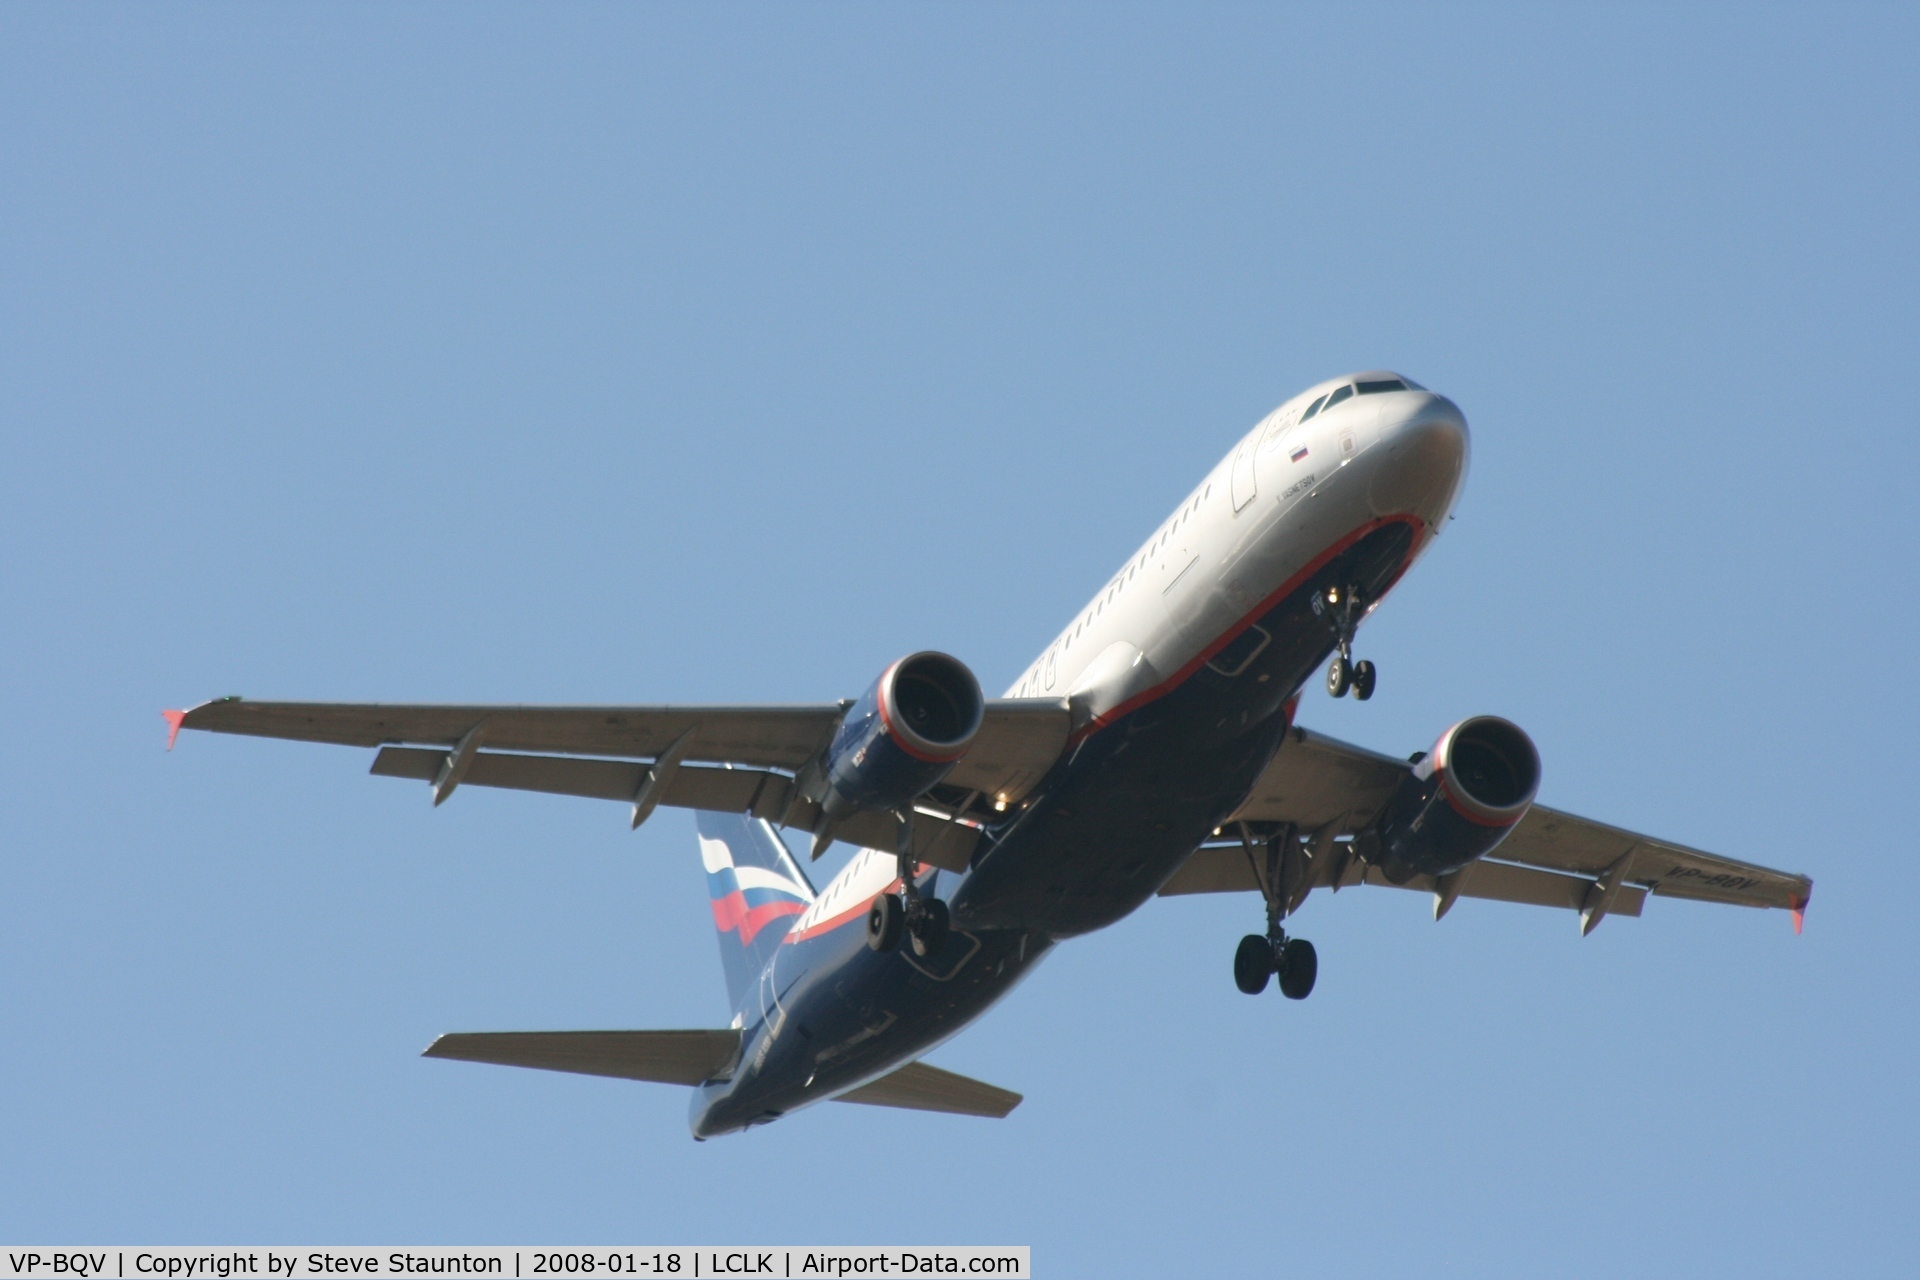 VP-BQV, 2006 Airbus A320-214 C/N 2920, Taken in the Larnaca area 18th January 2008